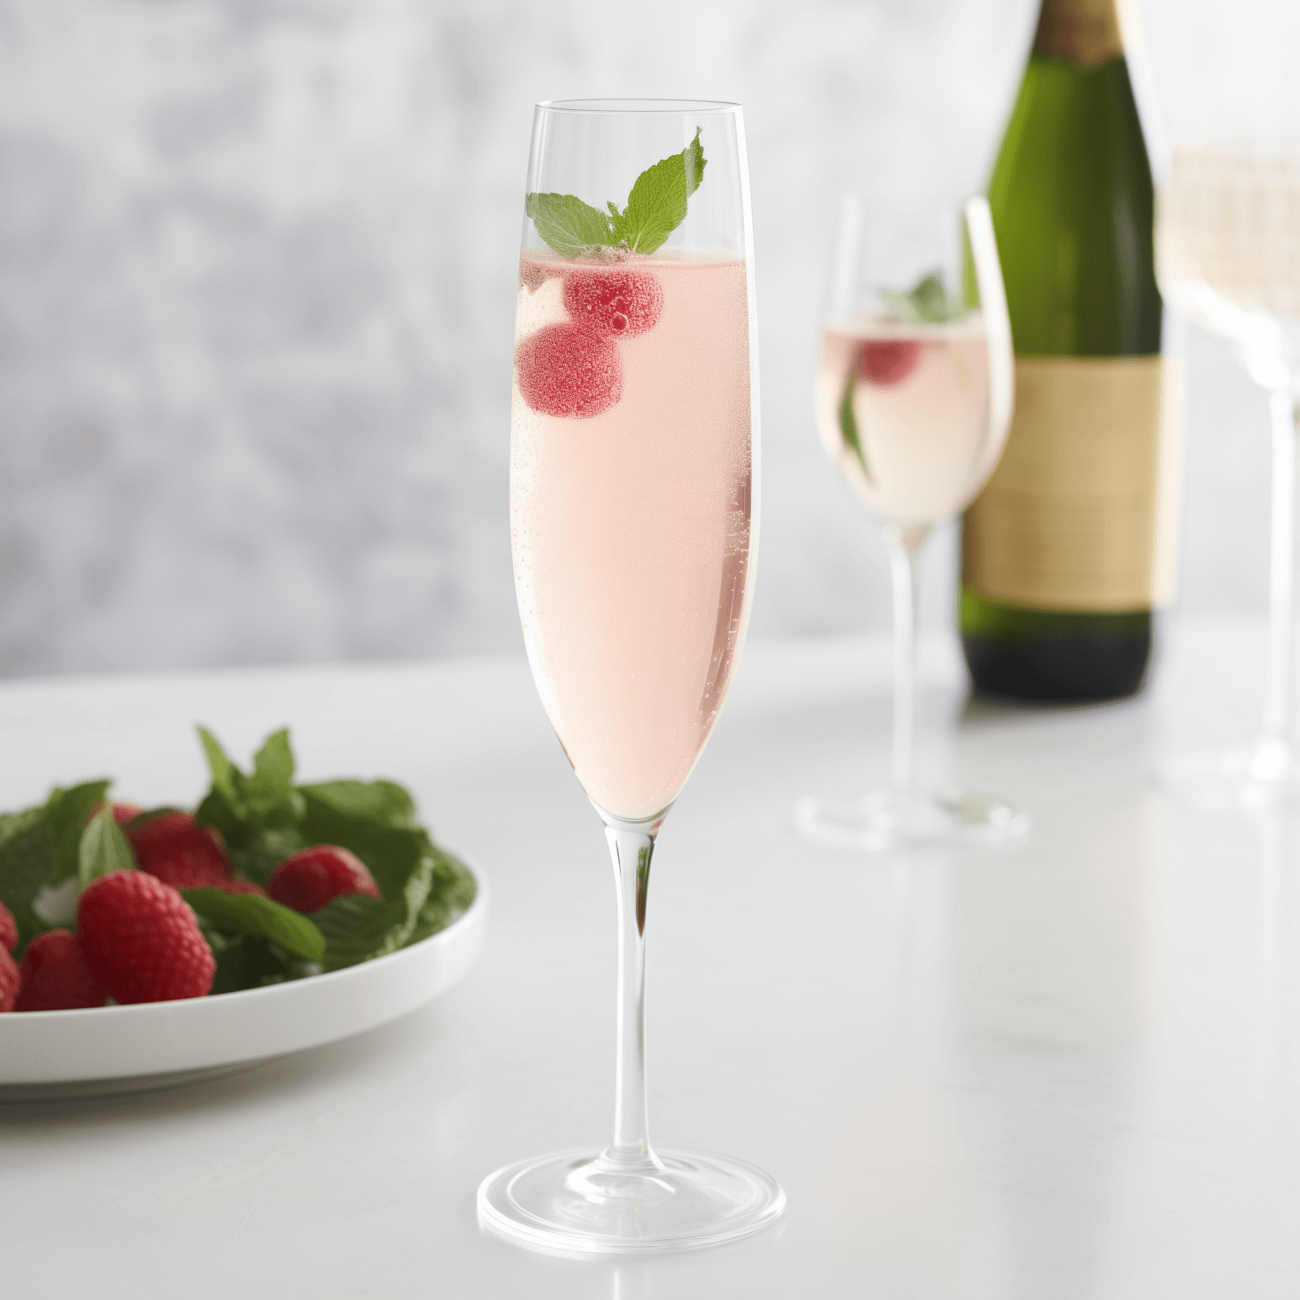 The Blushing Bride cocktail is a delightful balance of sweet and sour. The raspberry mix adds a fruity sweetness, which is perfectly balanced by the tartness of the sweet & sour mix. The vodka gives it a bit of a kick, while the champagne or prosecco adds a bubbly, festive touch.